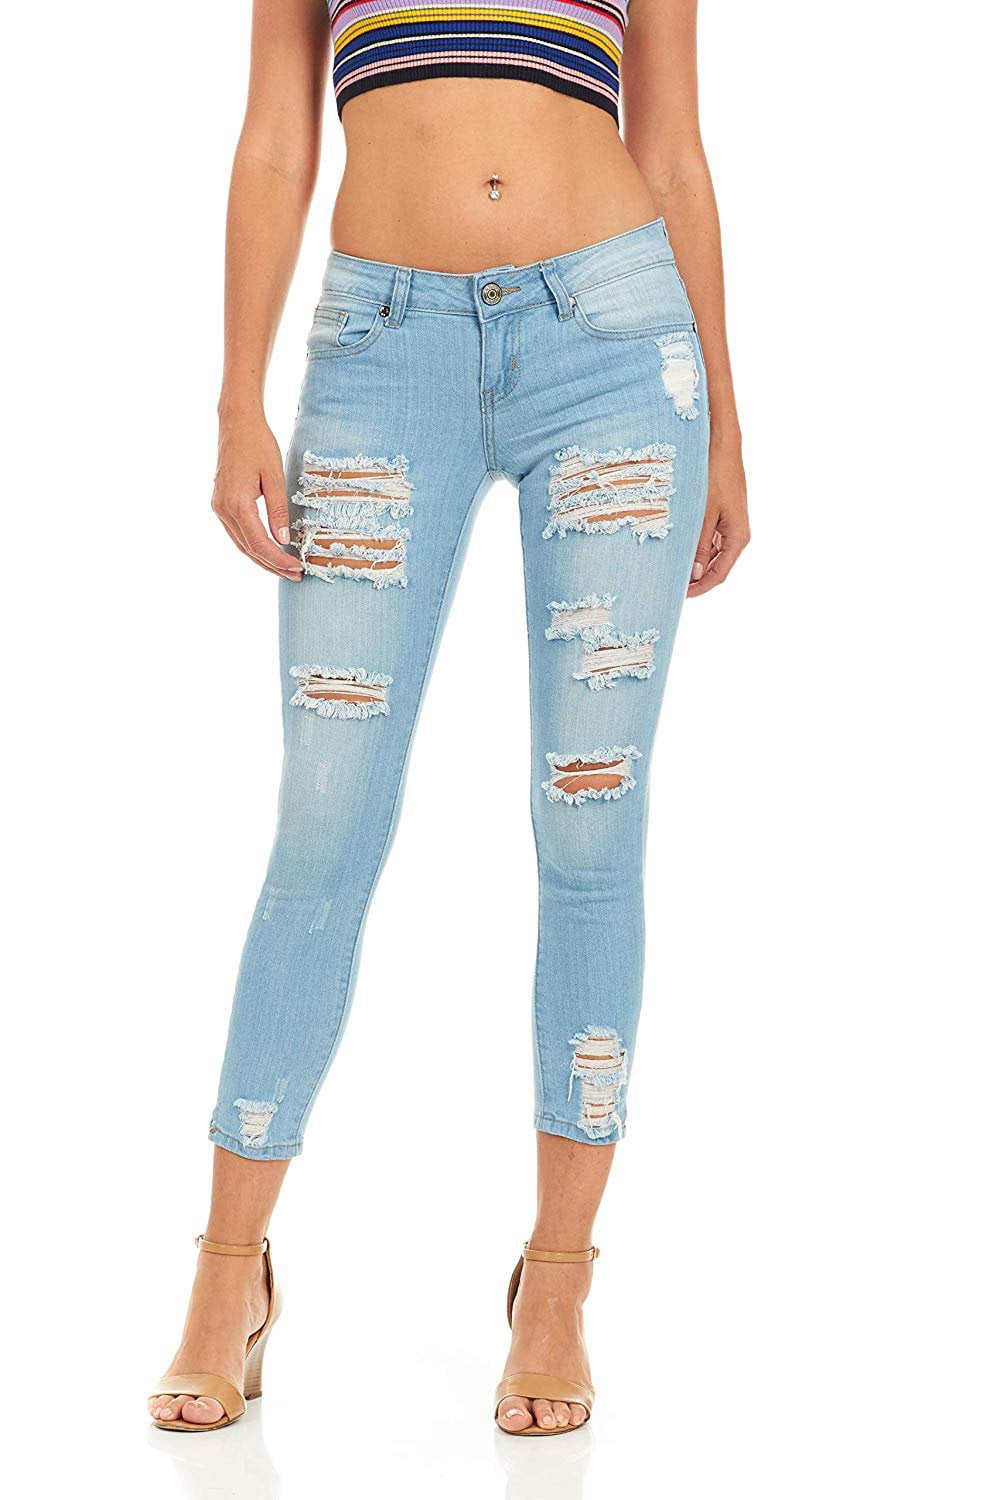 Cover Girl Jeans juniors plus ripped repaired patched skinny pants for Teen  Girls distressed - Walmart.com